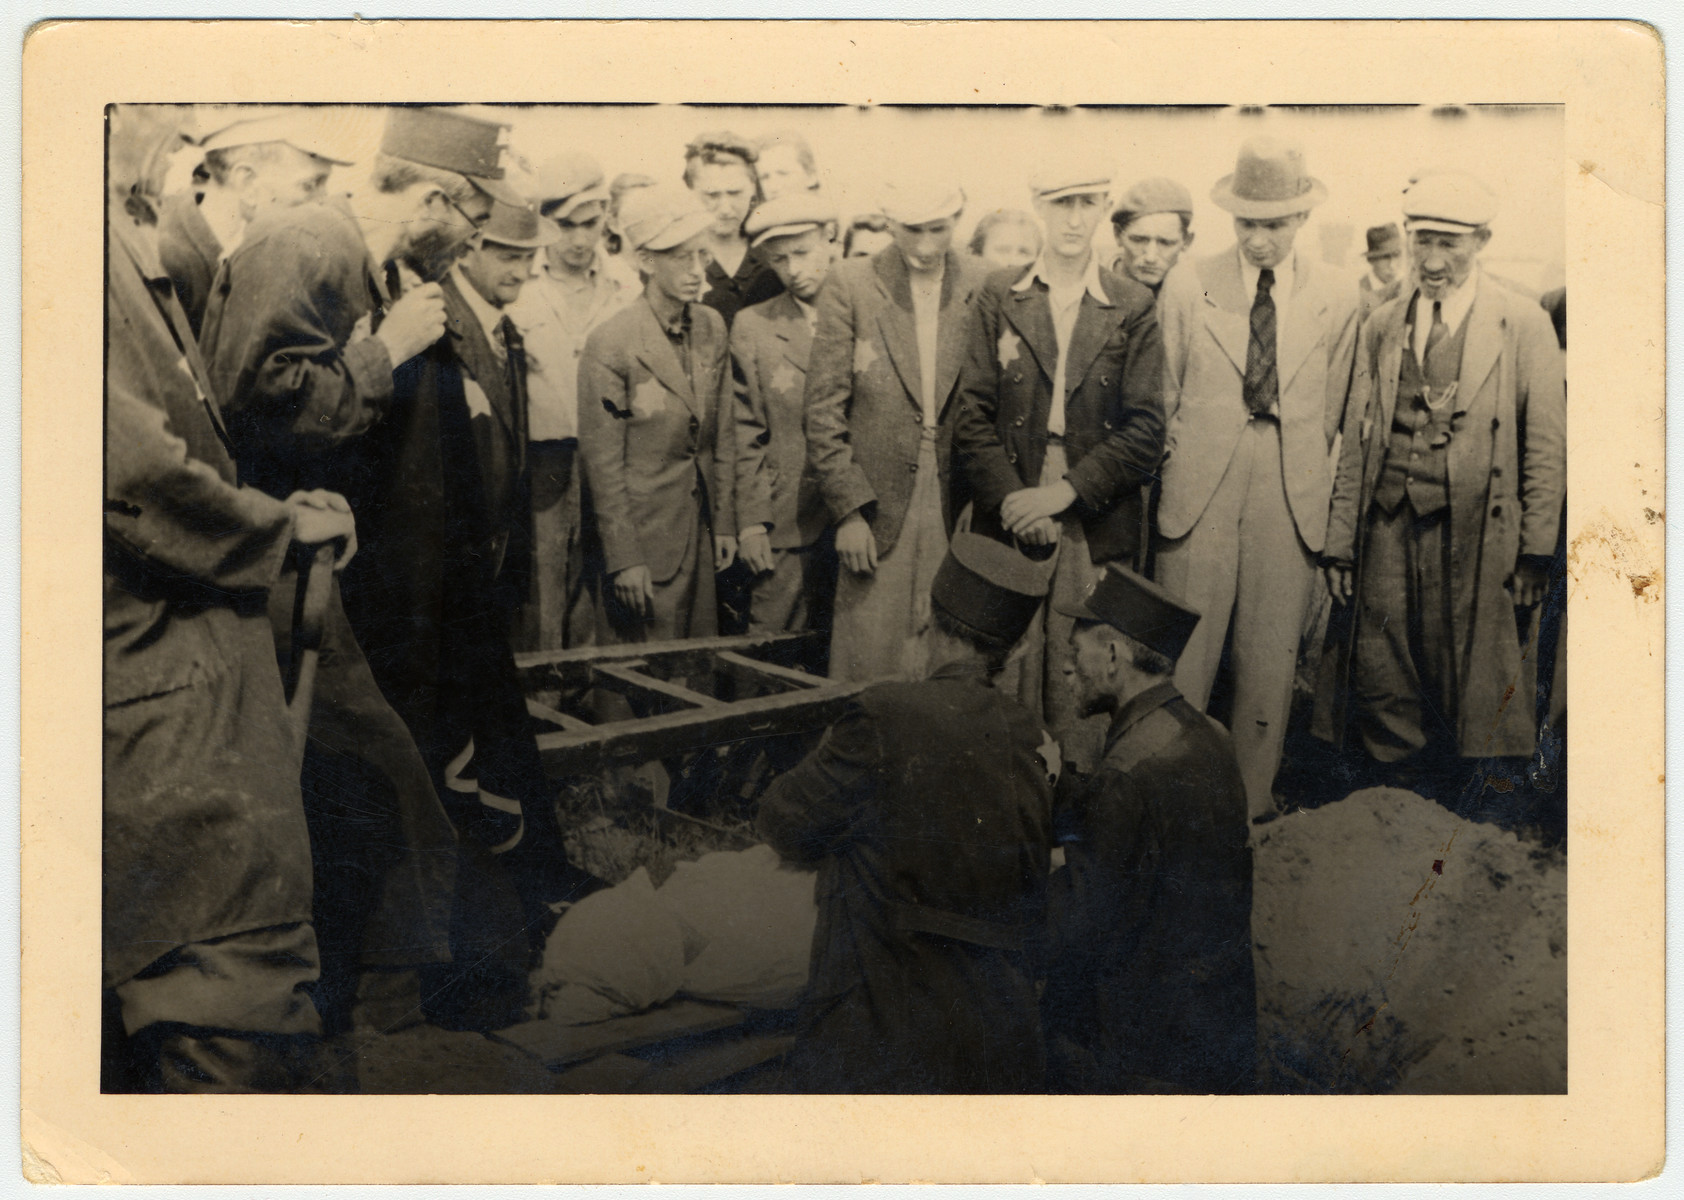 Jews gather by a graveside during a funeral of a girl killed by a lightning strike in the Lodz ghetto.

Standing third from right is Henryk Bergman and next to him, second from right, is Kaufman.